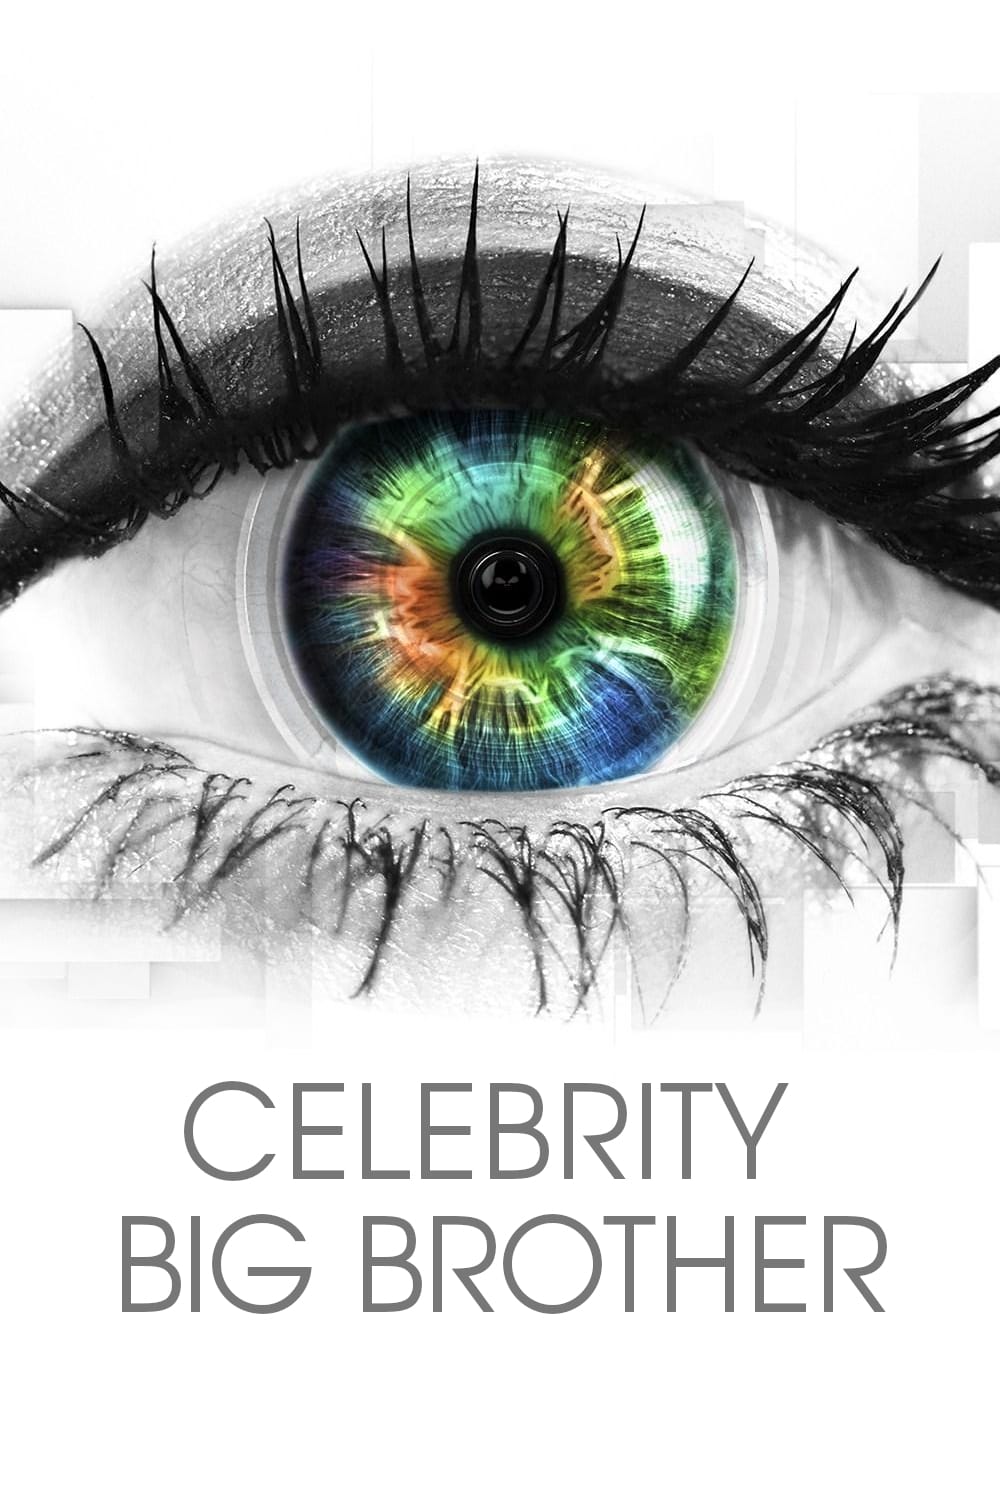 Celebrity Big Brother TV Shows About Voting